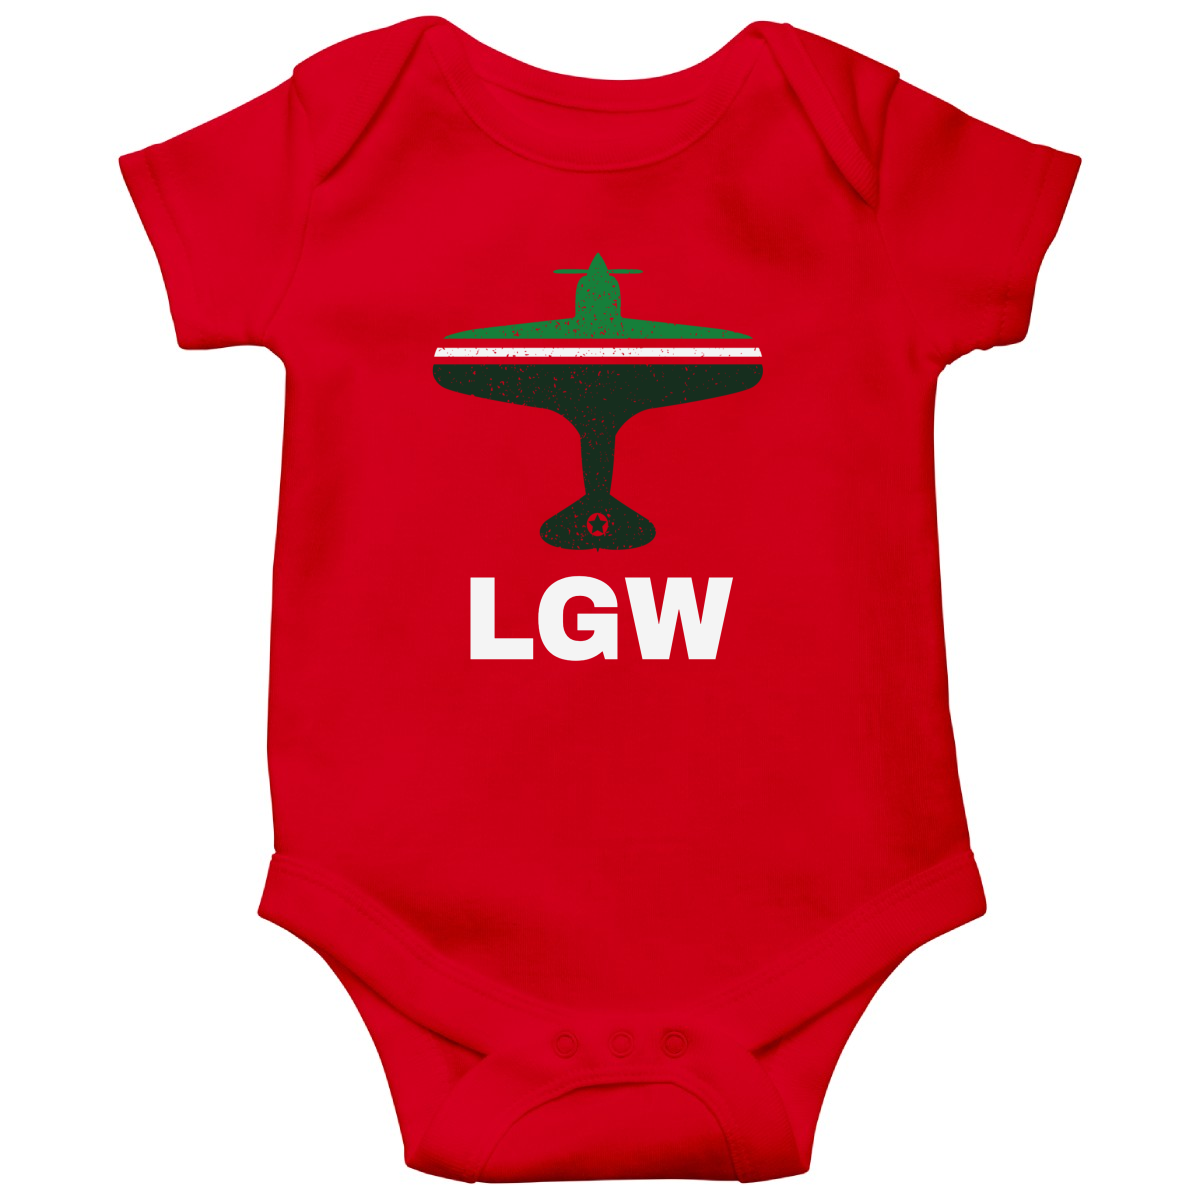 Fly London LGW Airport Baby Bodysuits | Red